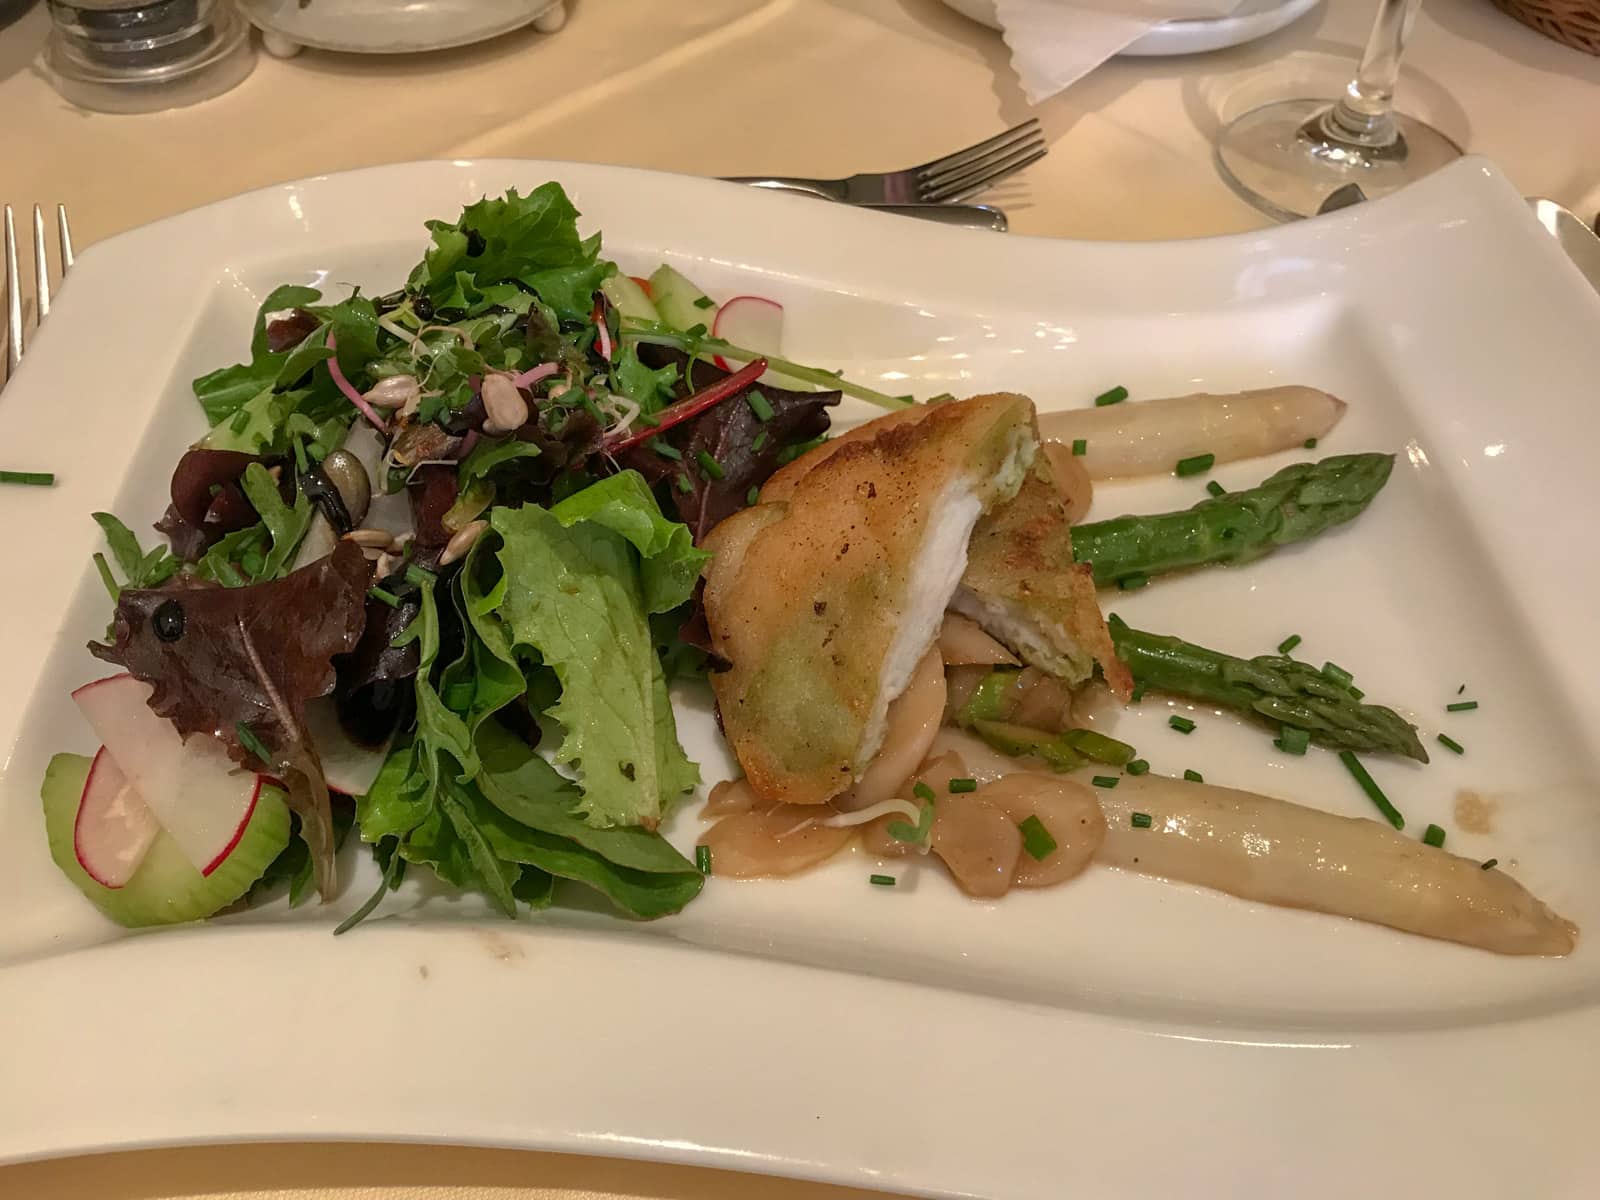 A white, flag-shaped plate on a dining table with salad, asparagus and fish served on it.